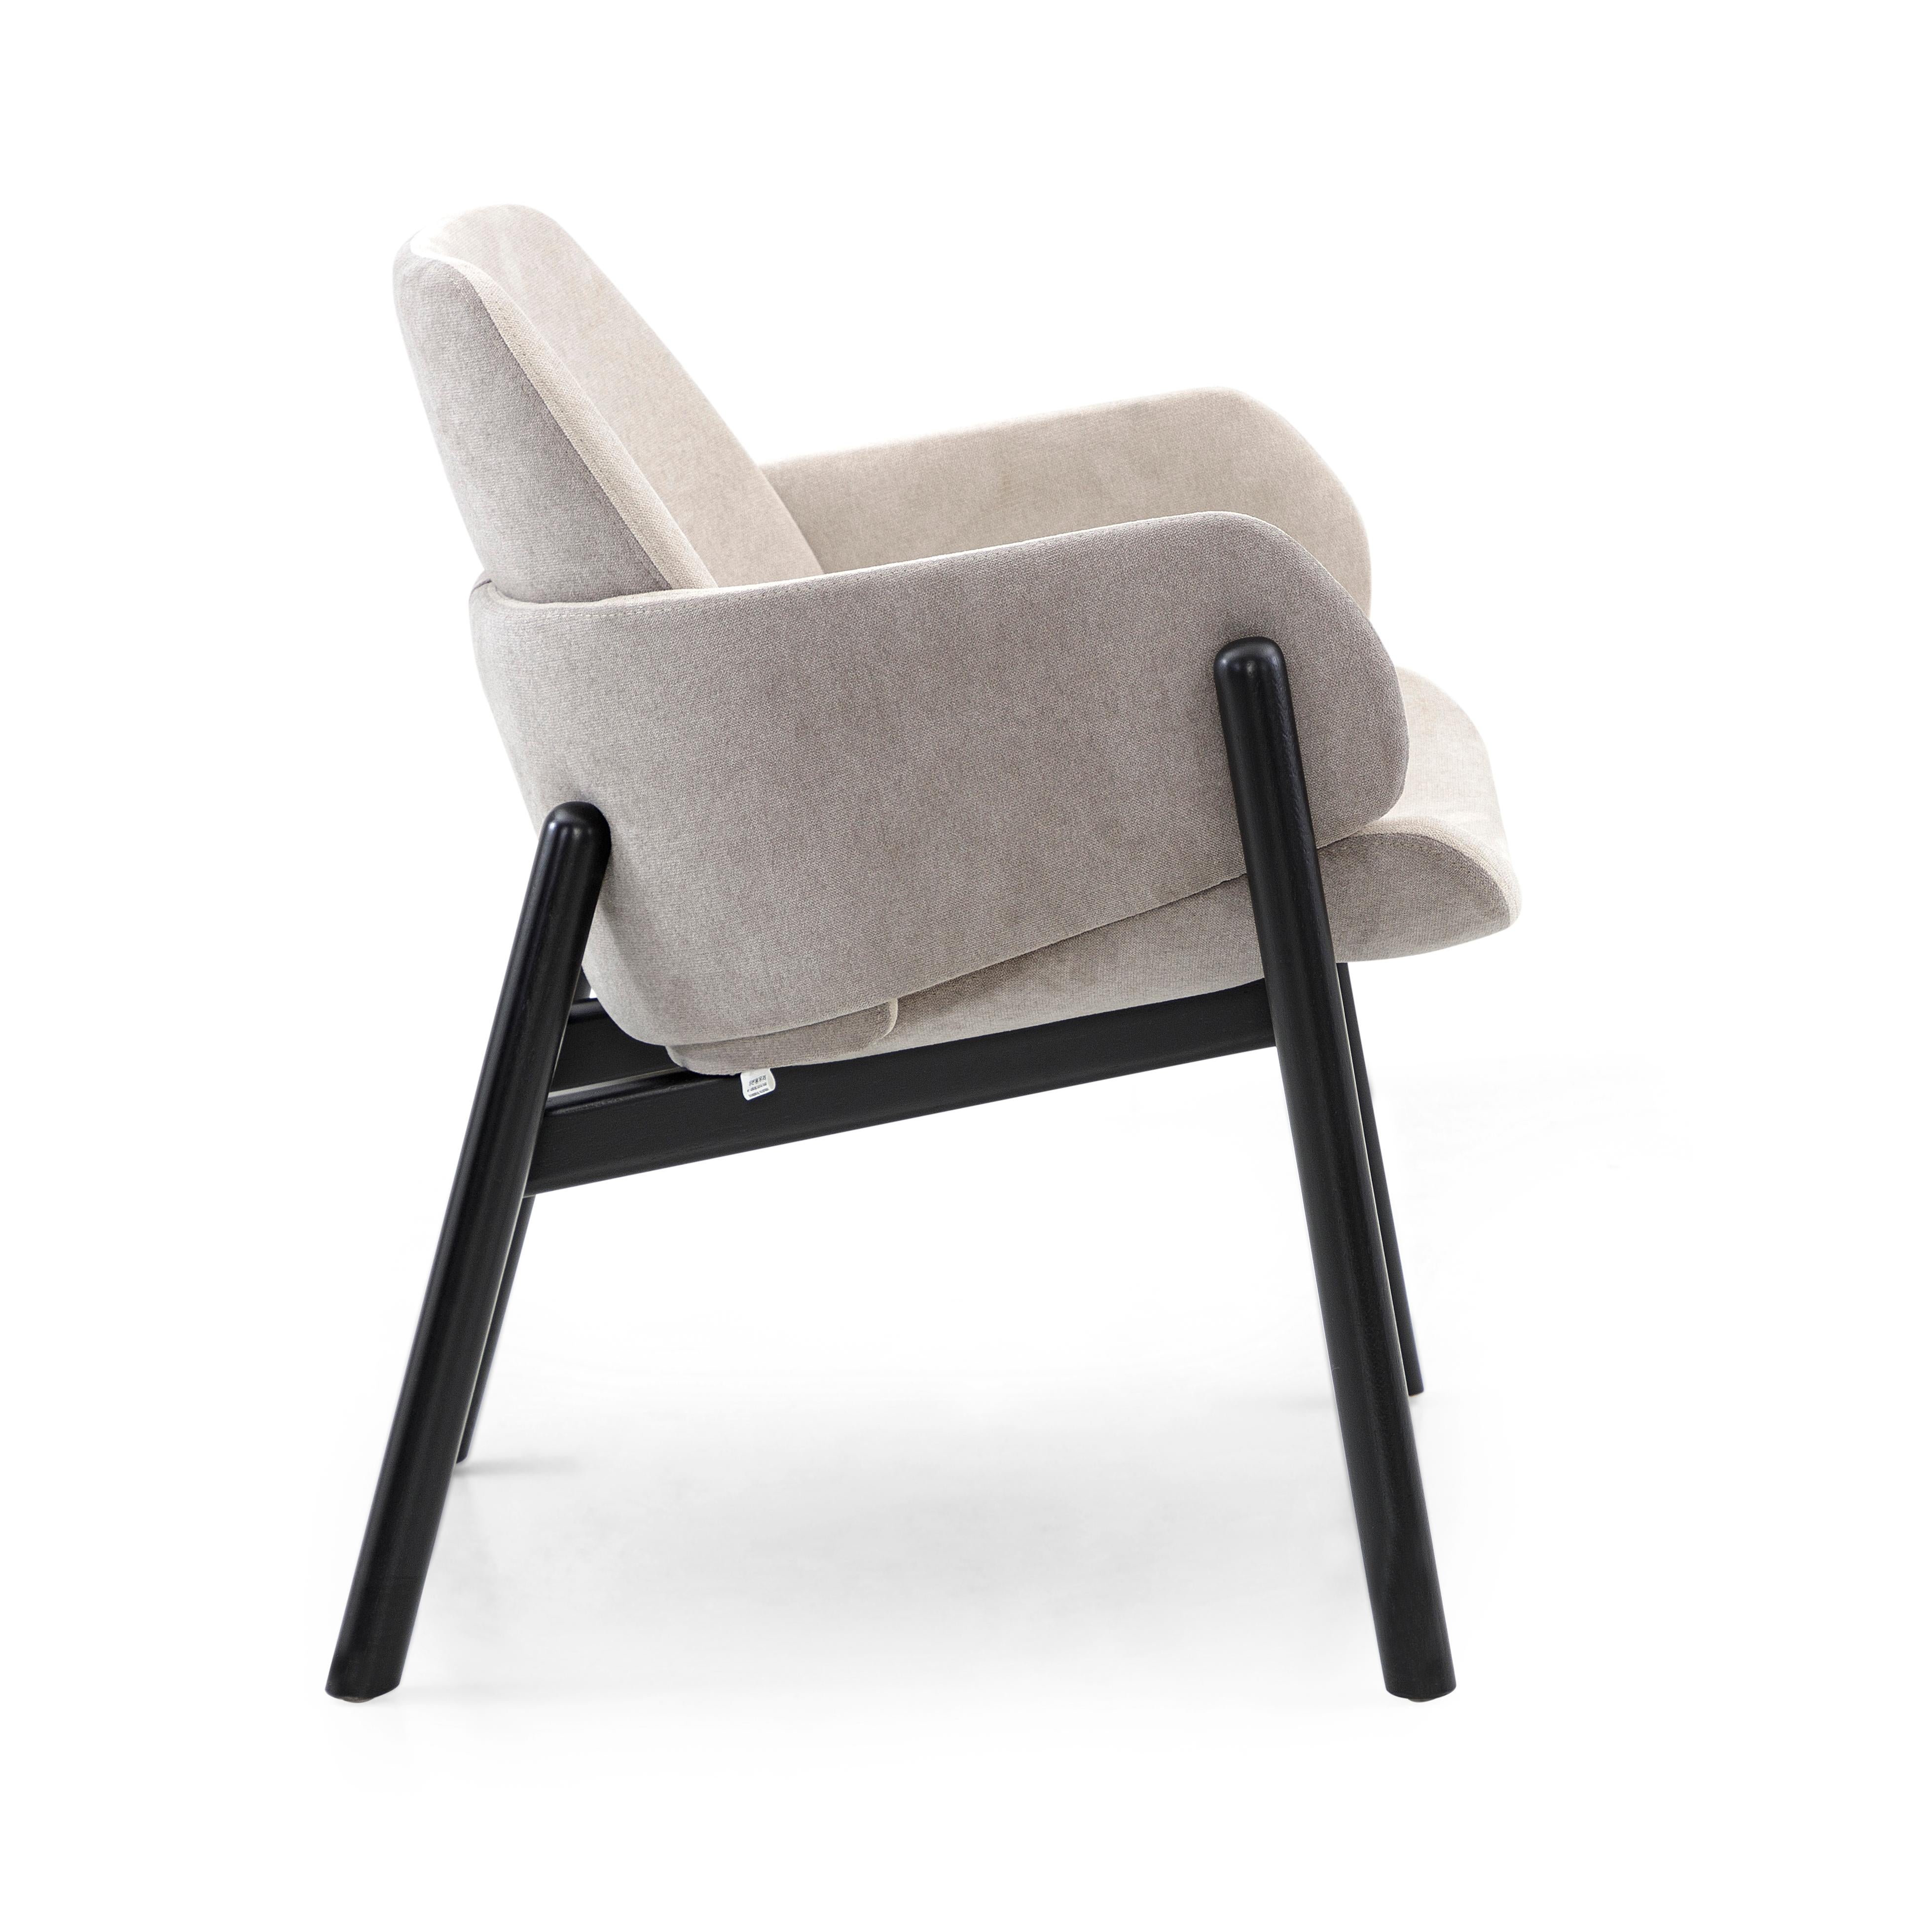 The above chair goes above and beyond in terms of design and comfortability. The combination of the light grey fabric and the black painted frame allows you to mix the Above chair in rooms already established and rooms with new designs. The seat,